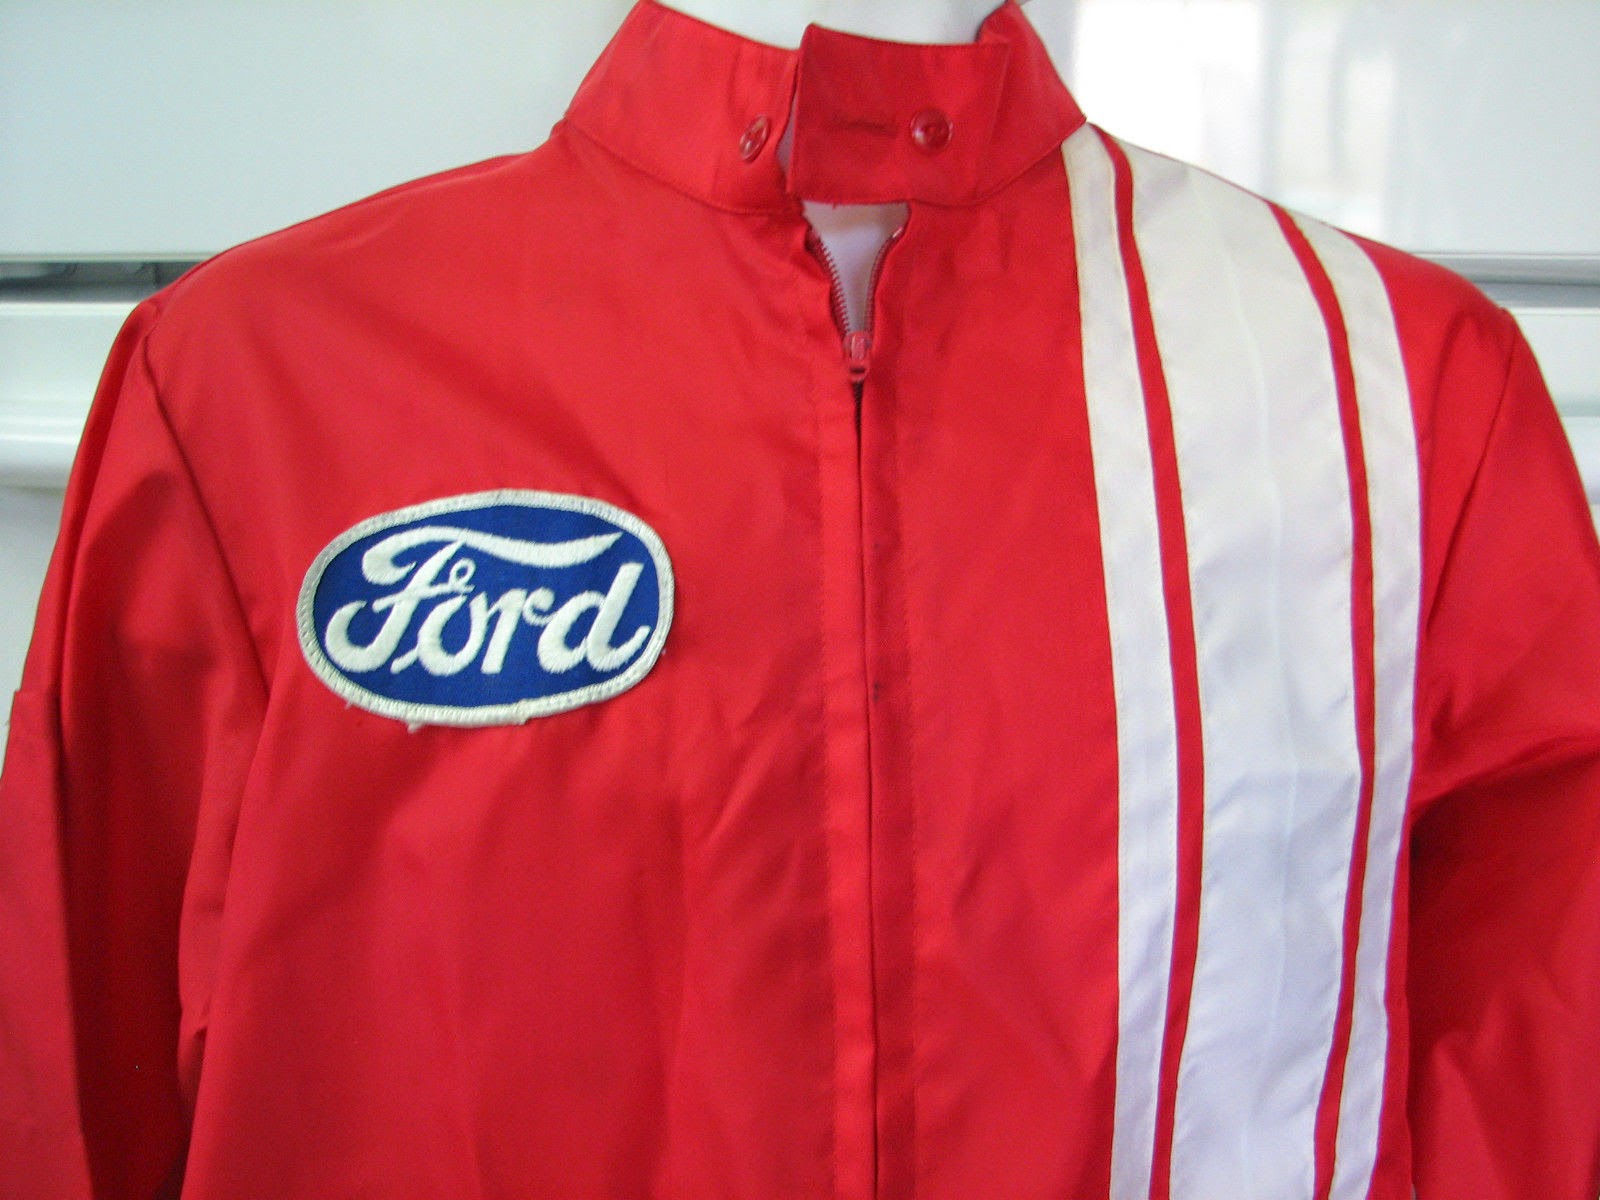 THRIFT SCORE...and more...: vintage Nylon Racing Jackets...